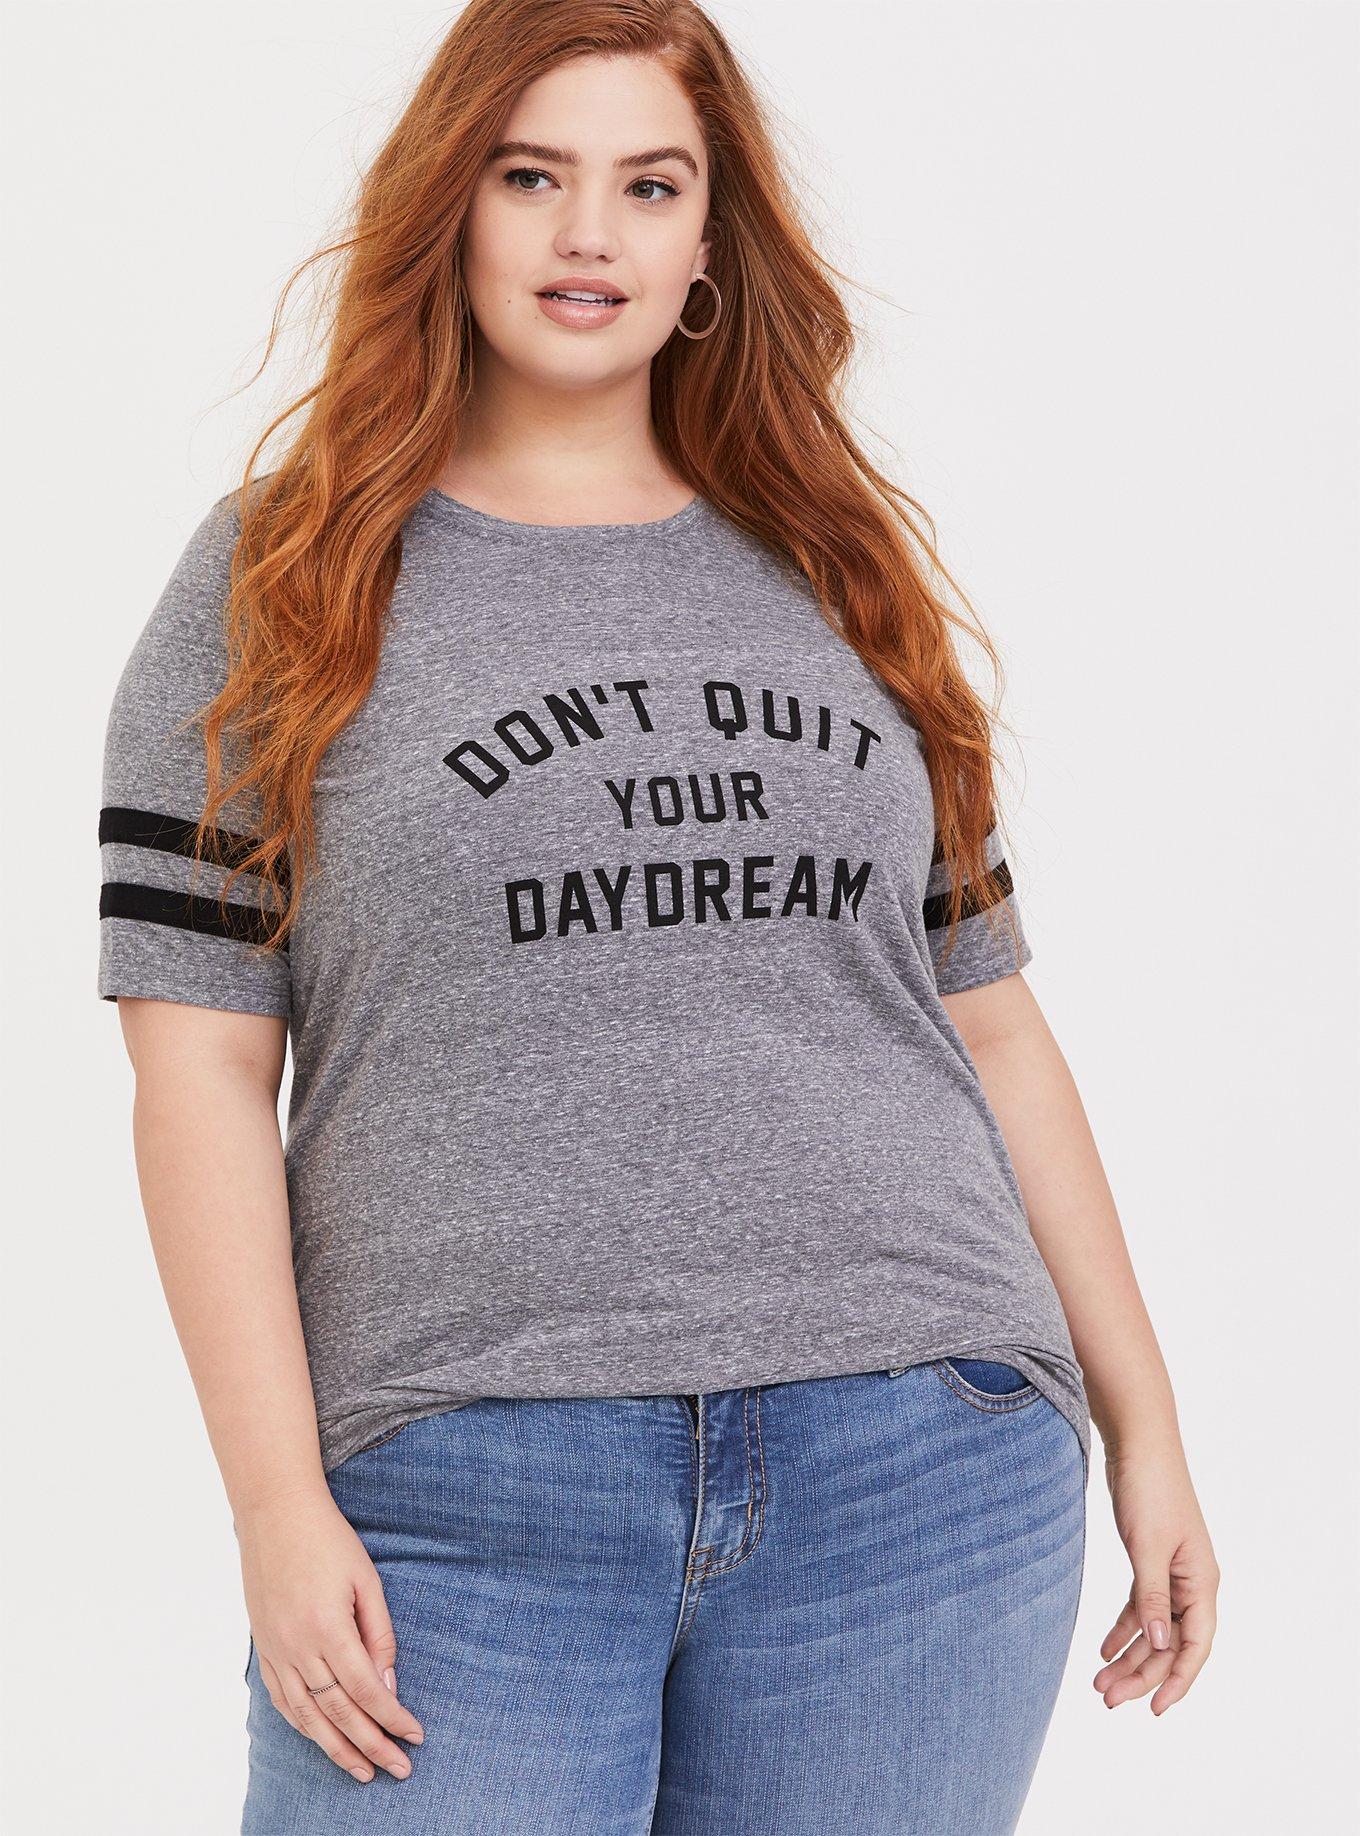 Plus Size - Don't Quit Your Daydream Grey Triblend Football Tee - Torrid